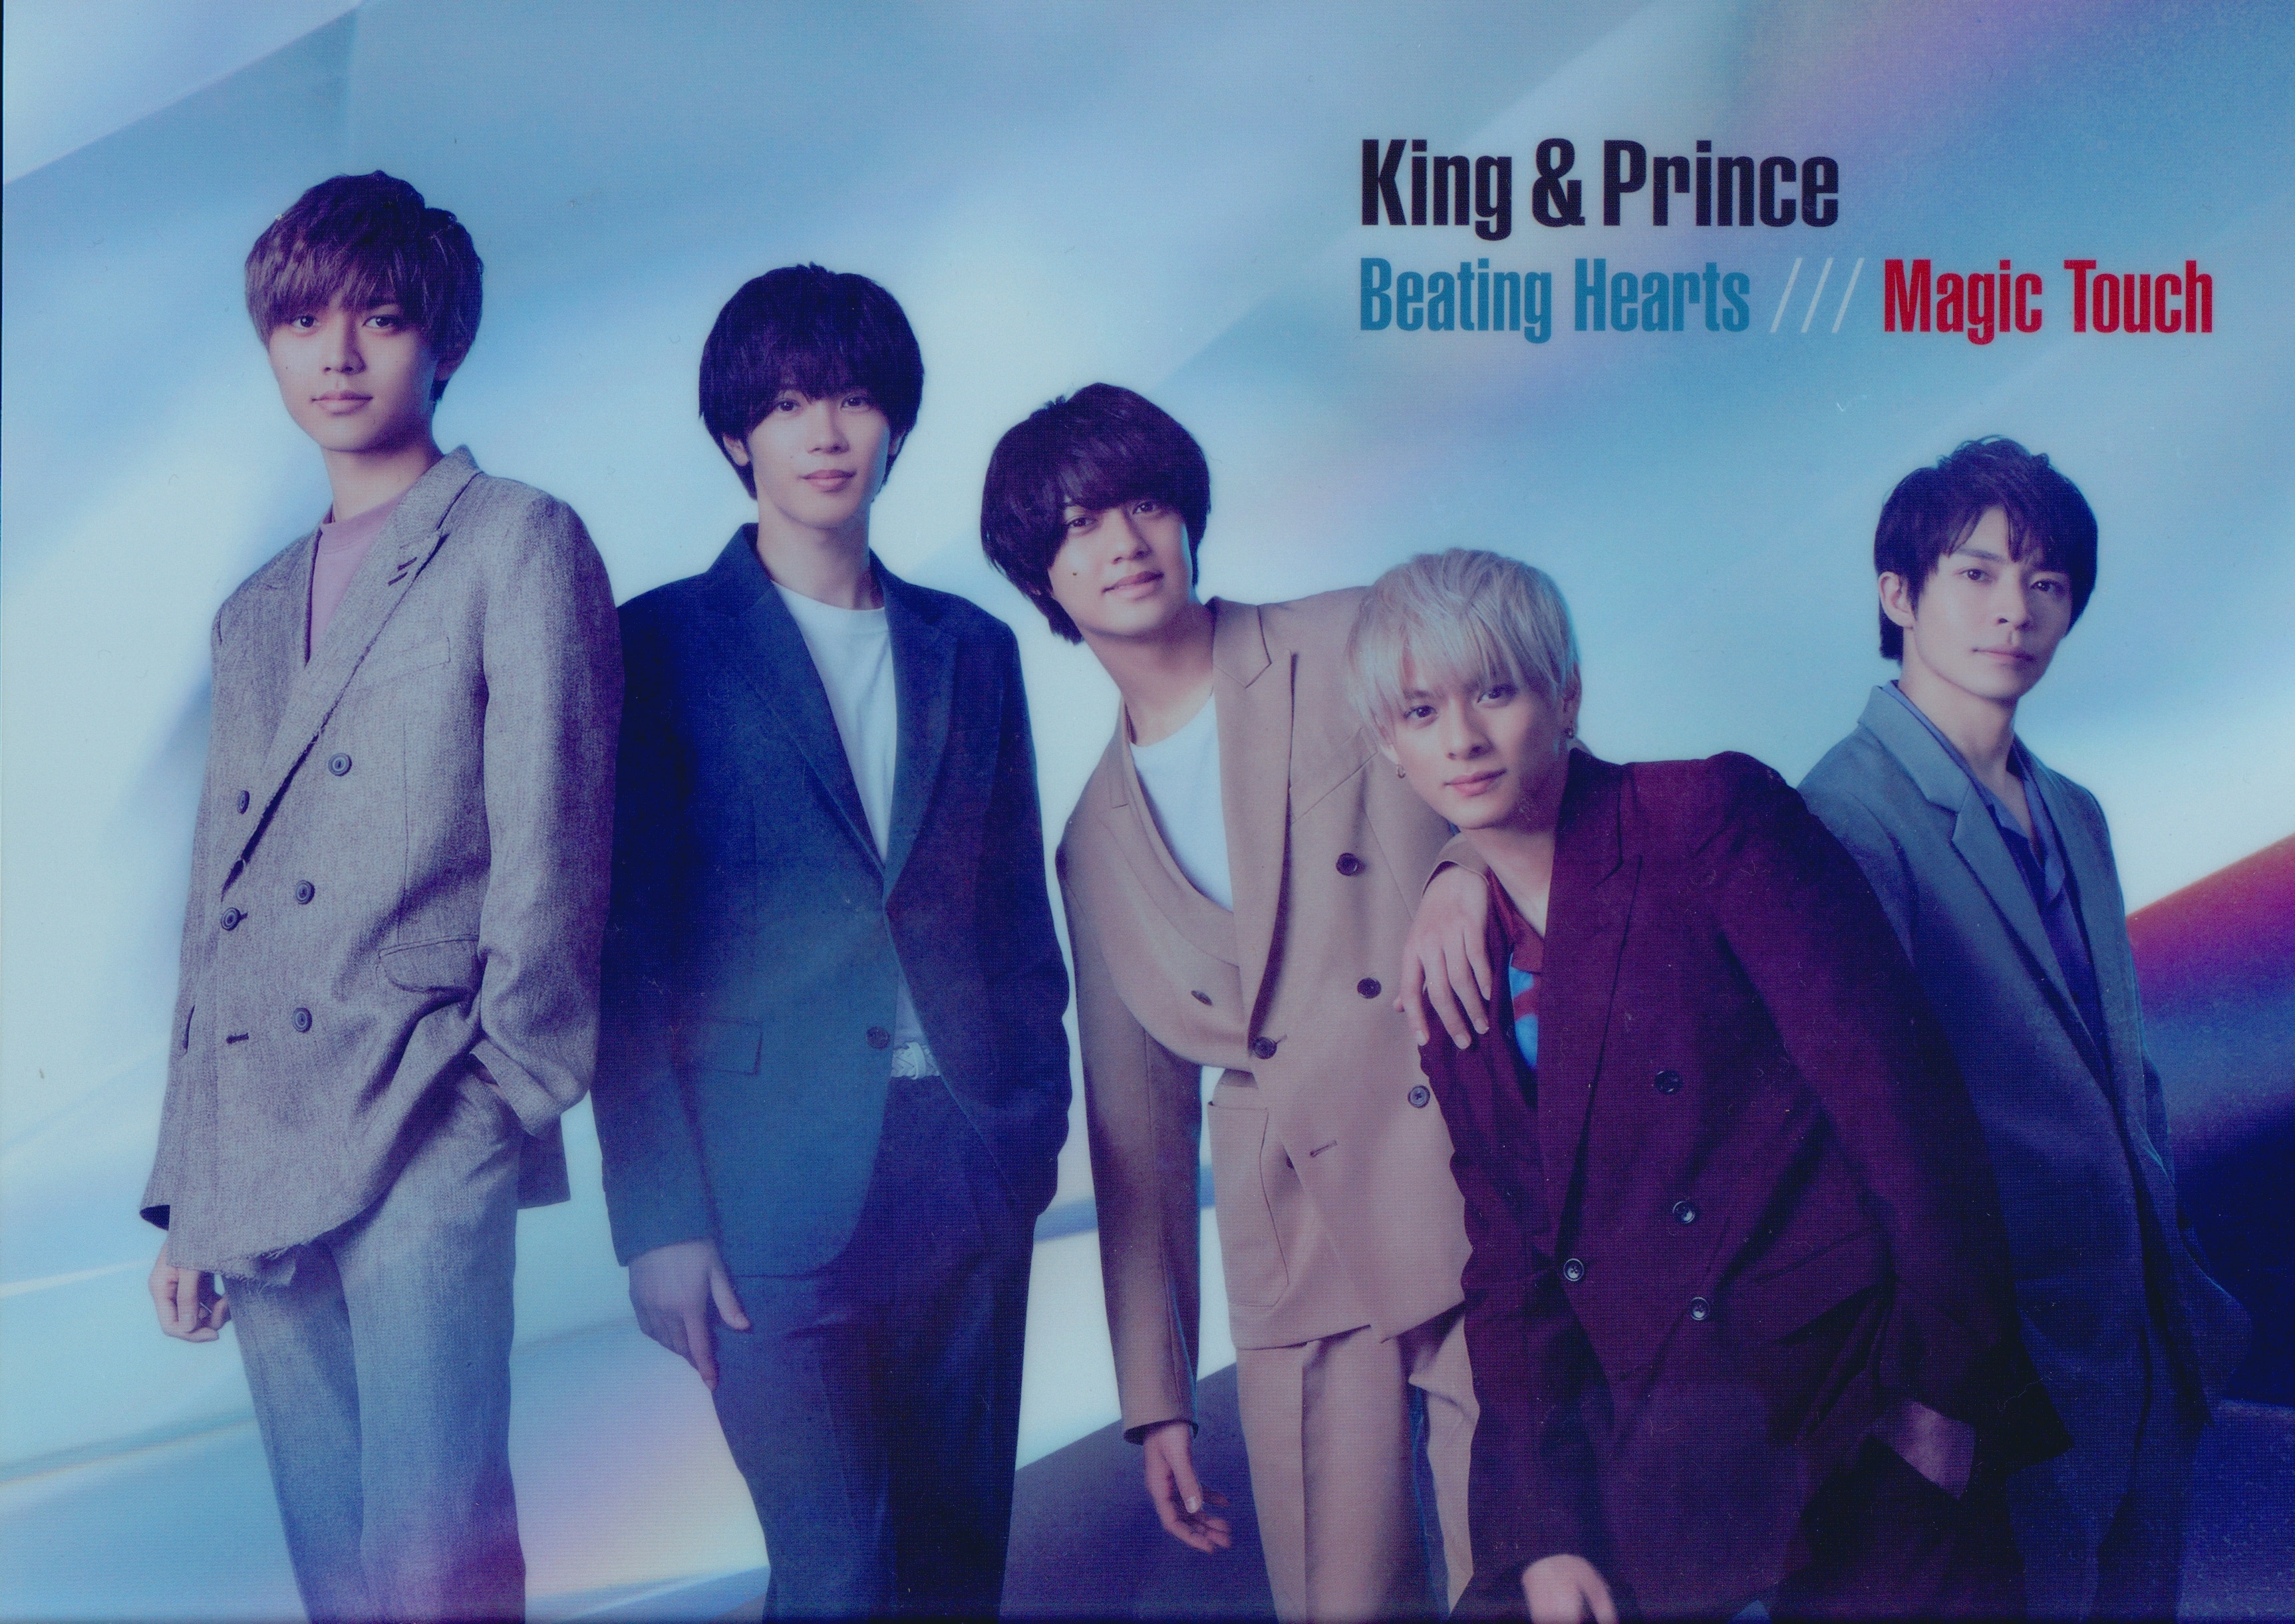 King and Prince Magic Touch/Beating Hearts clear poster